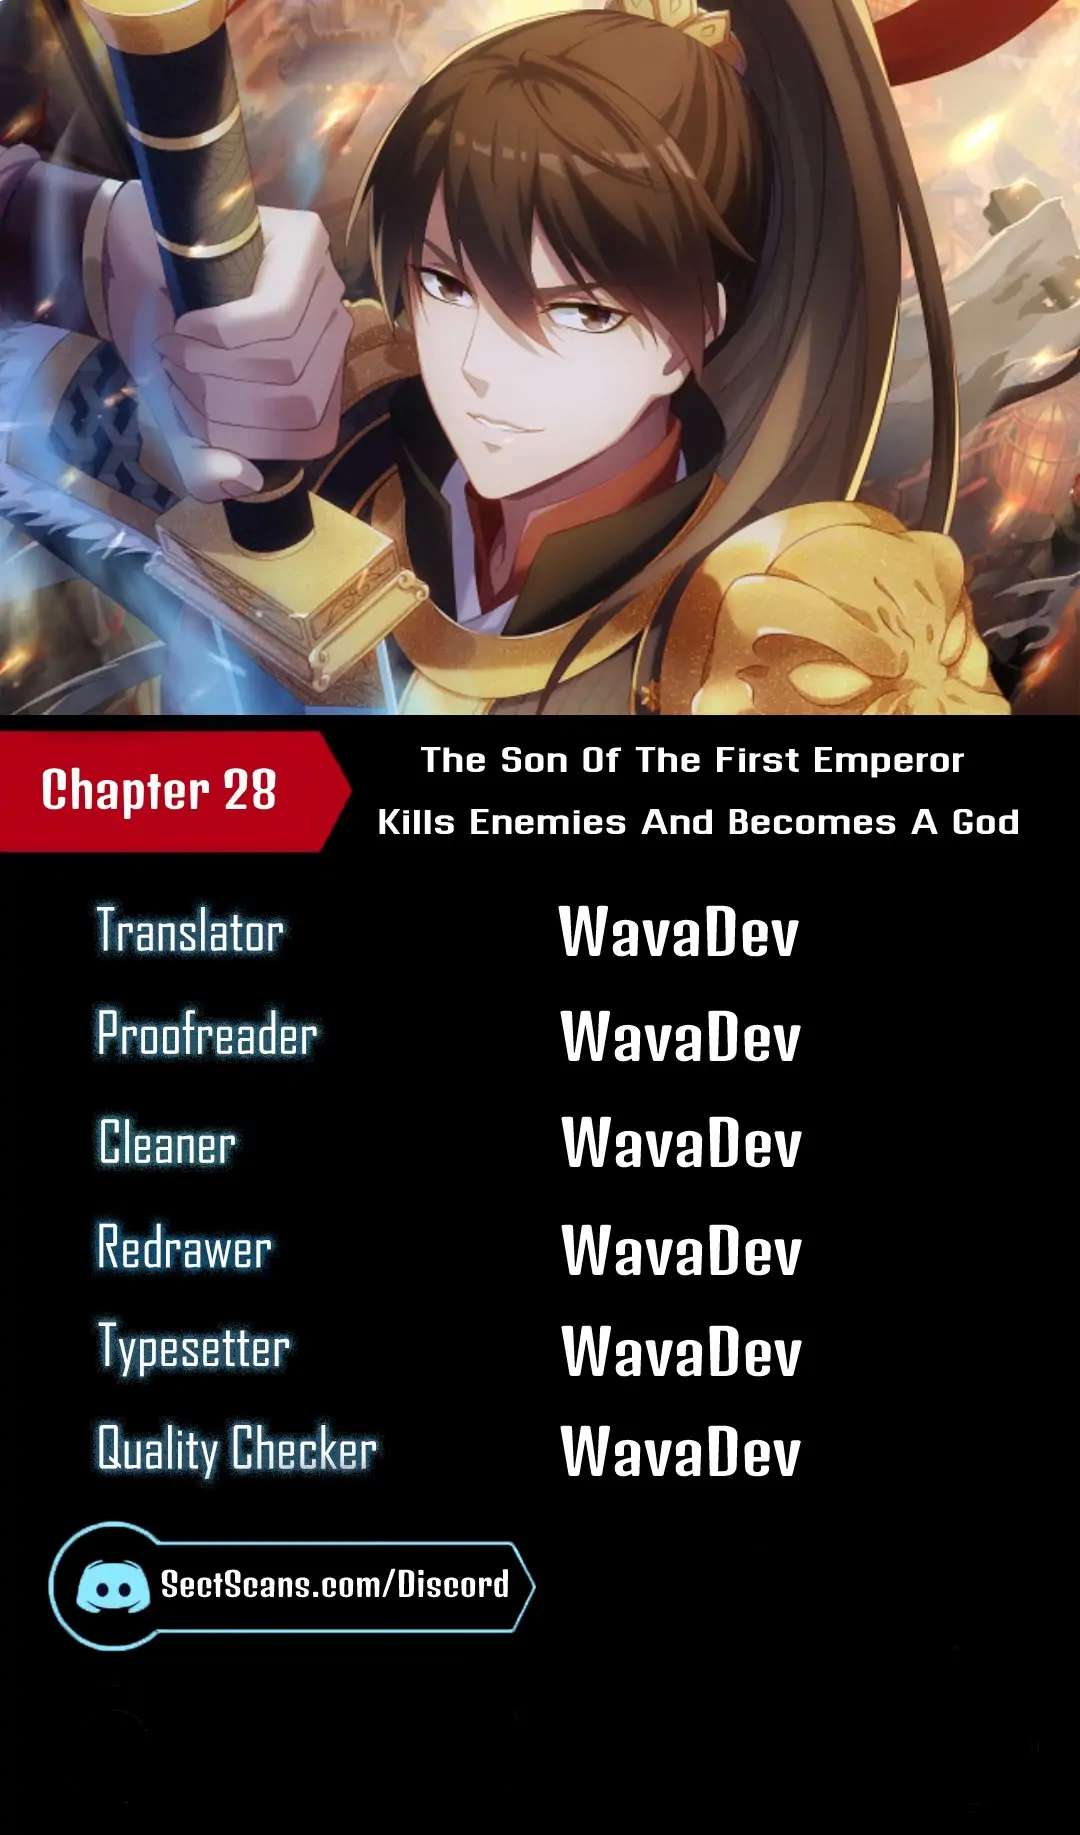 The Son Of The First Emperor Kills Enemies And Becomes A God - Page 2